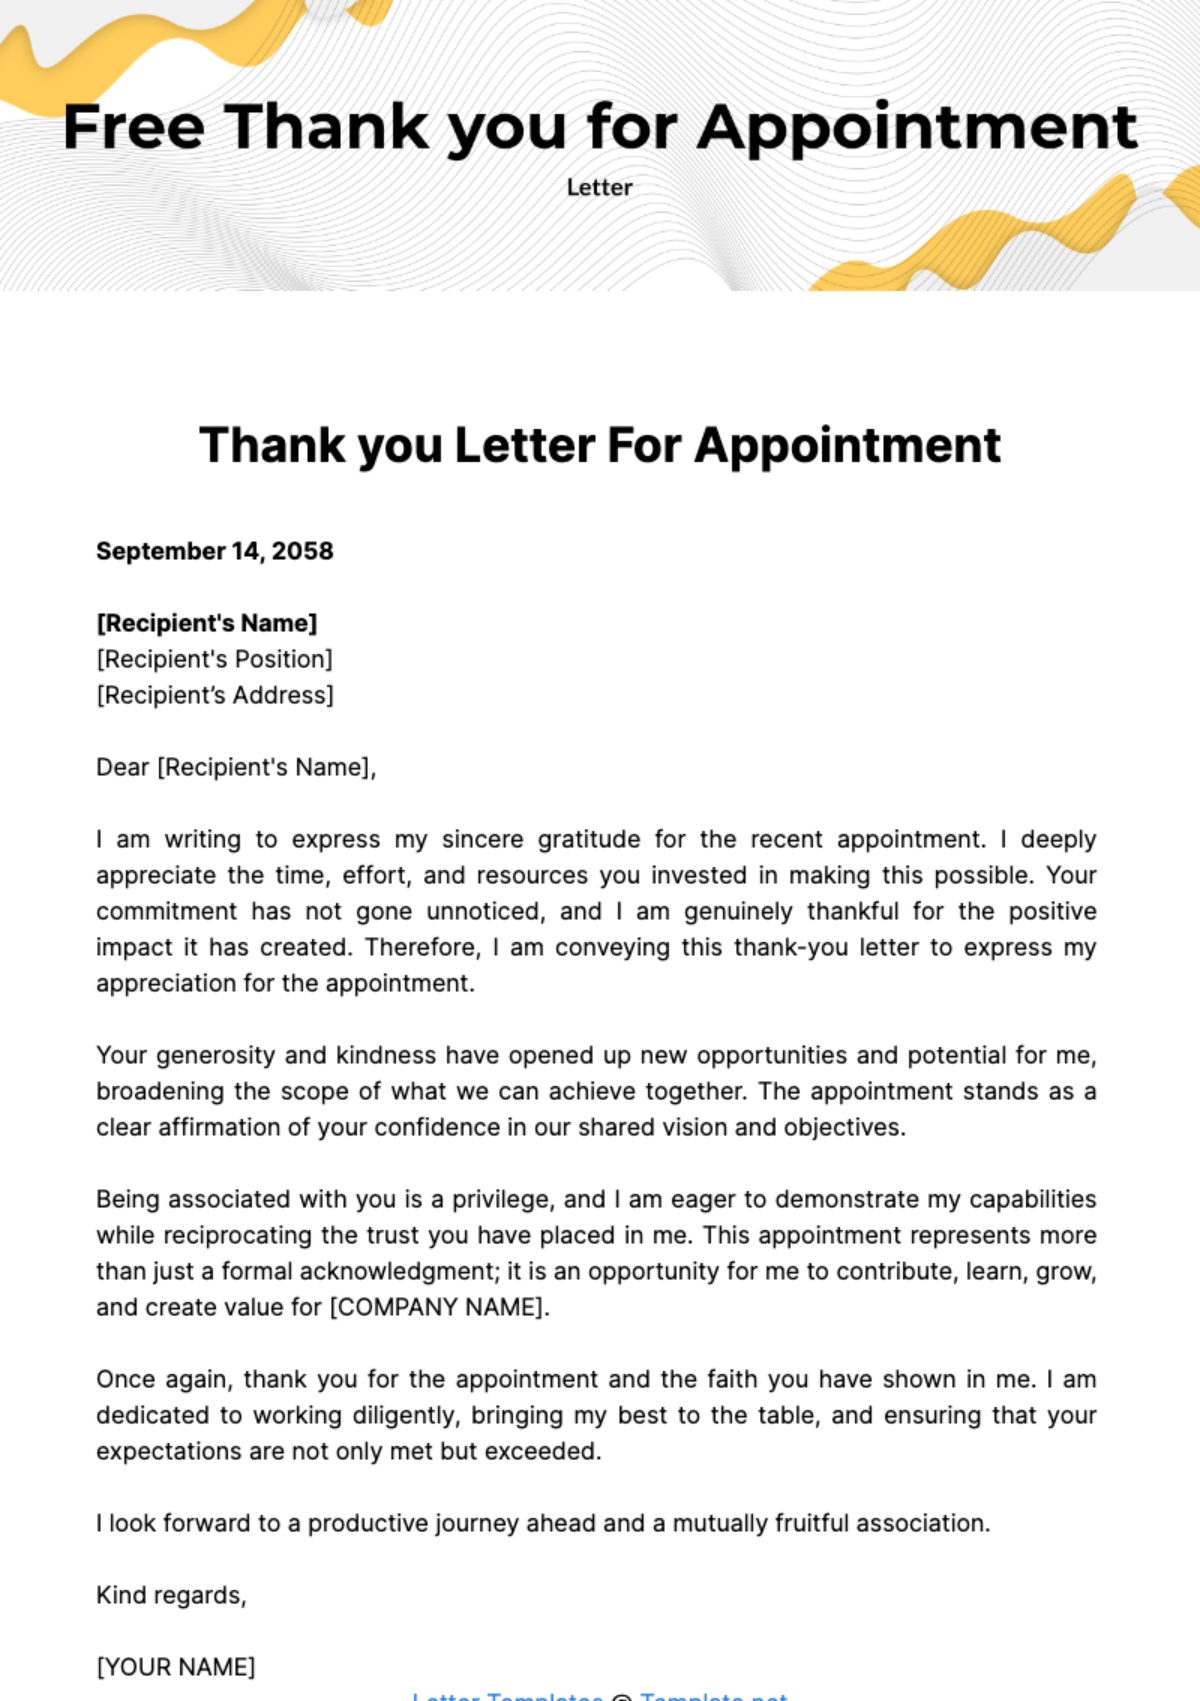 Free Thank you Letter for Appointment Template